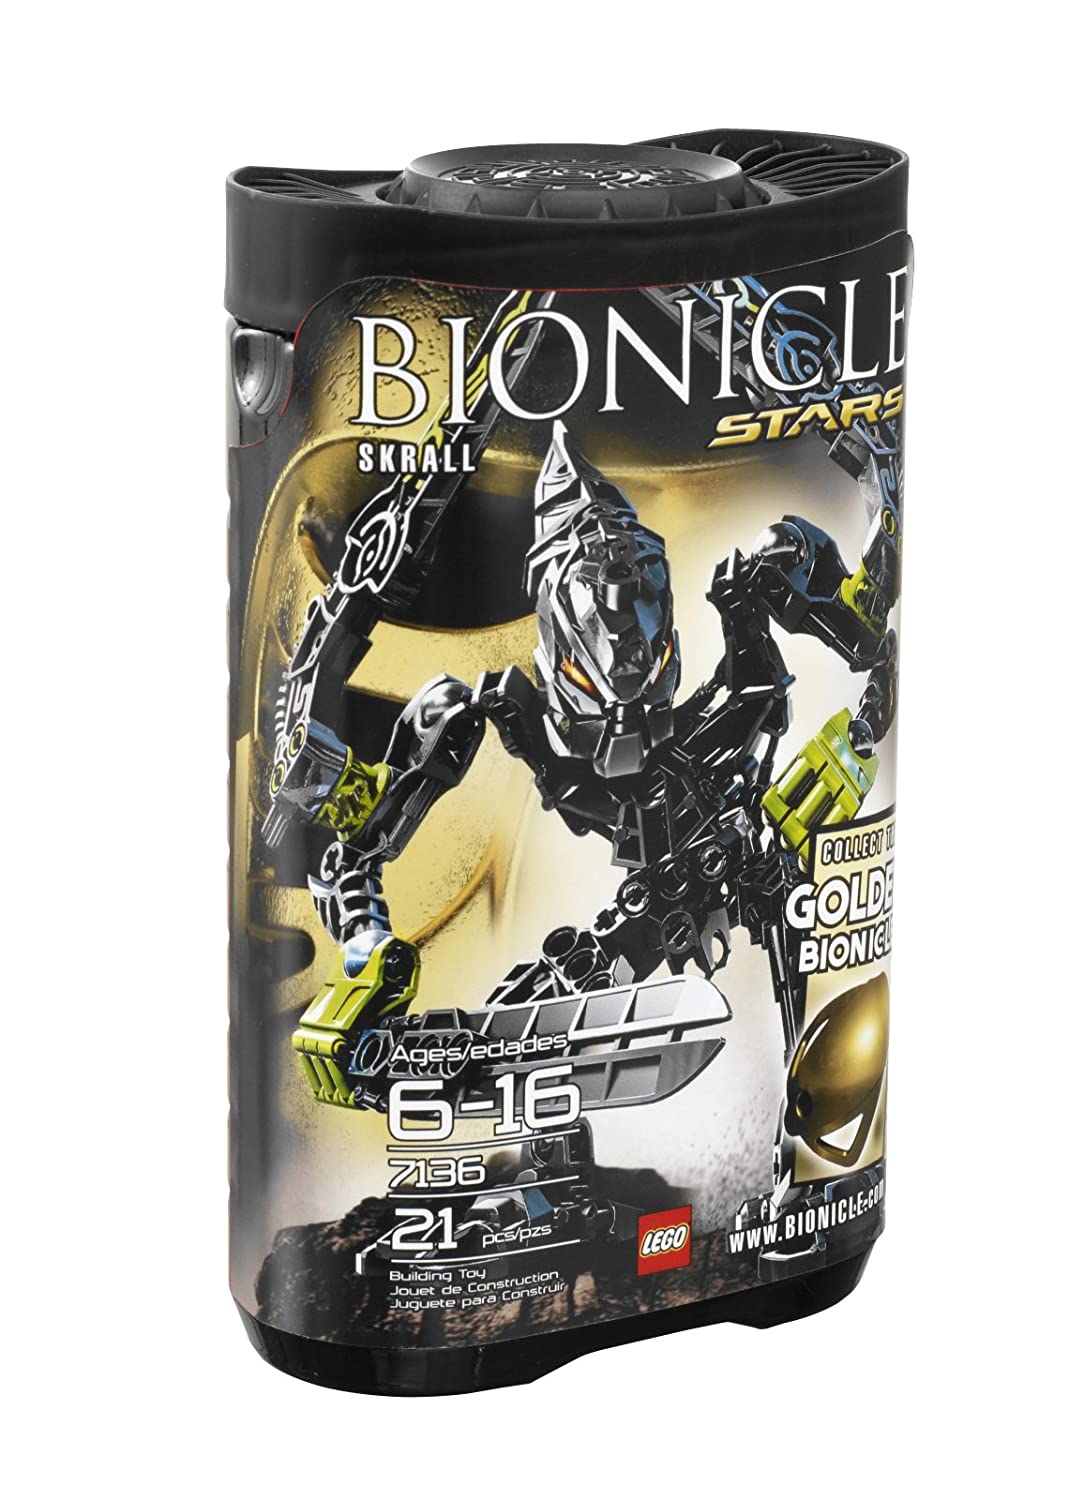 15 Best Lego BIONICLE Sets 2022 - Buying Guide & Reviews 11